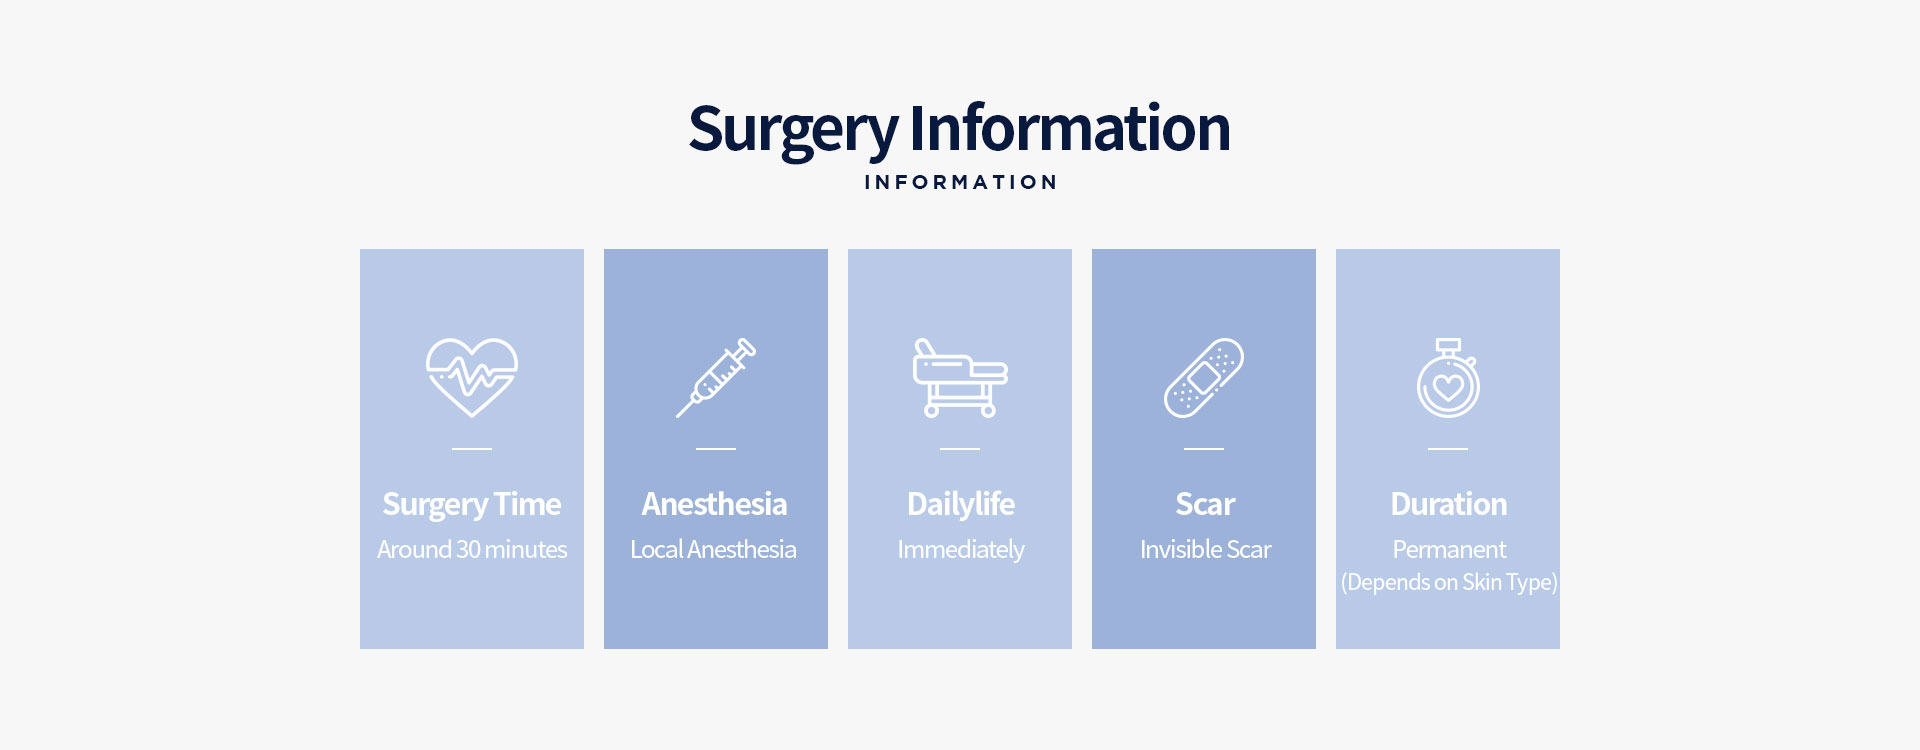 Surgery Information